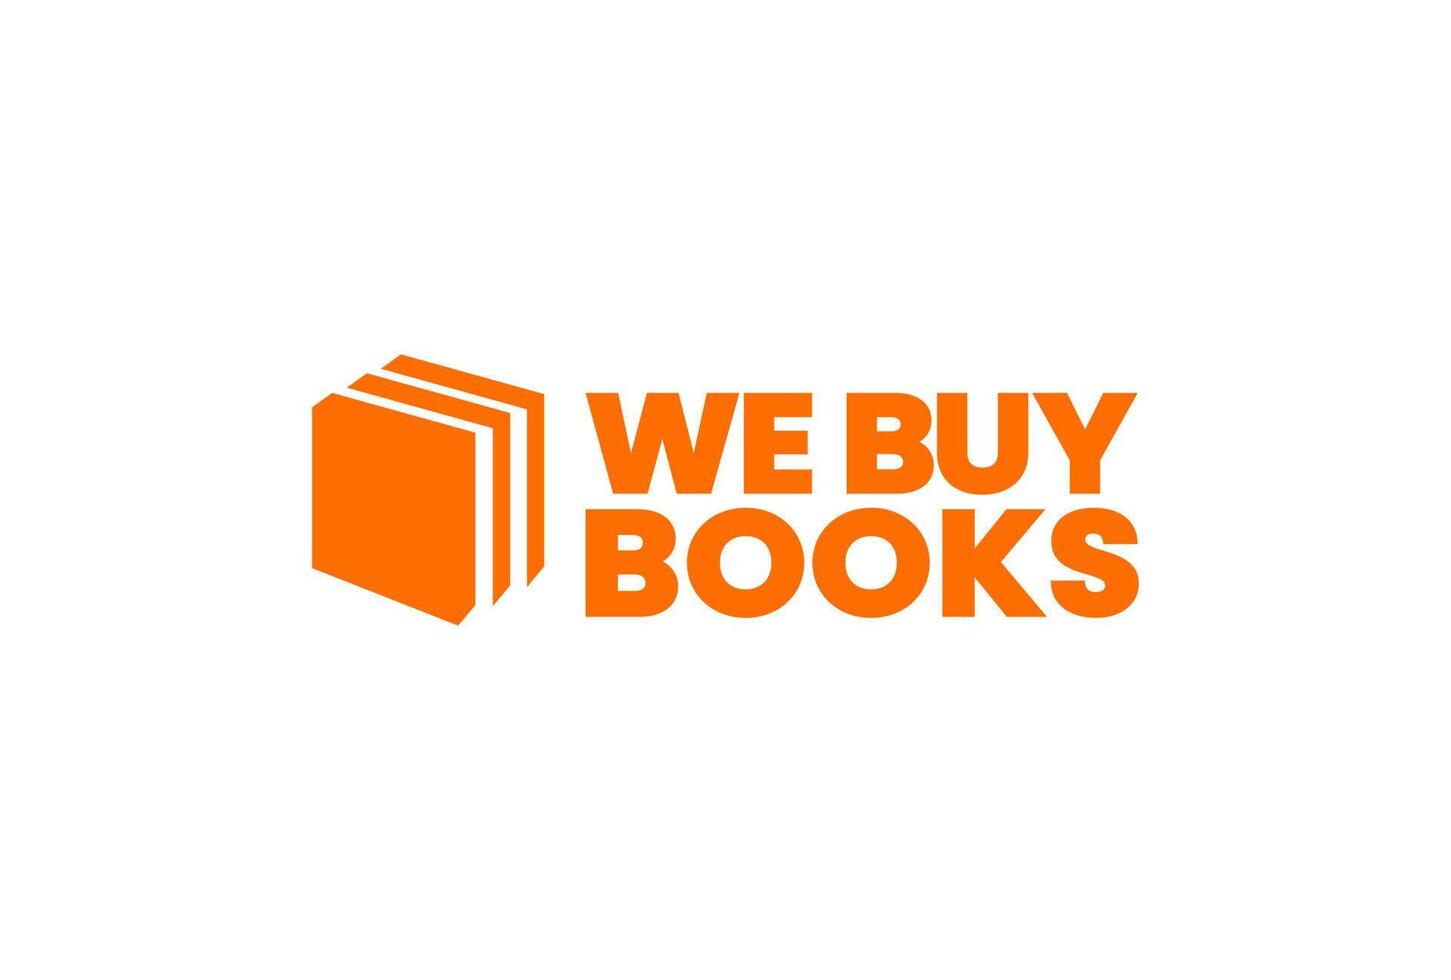 We buy books logo minimalist with orange color, perfect with company business, marketing, online shop, shop vector